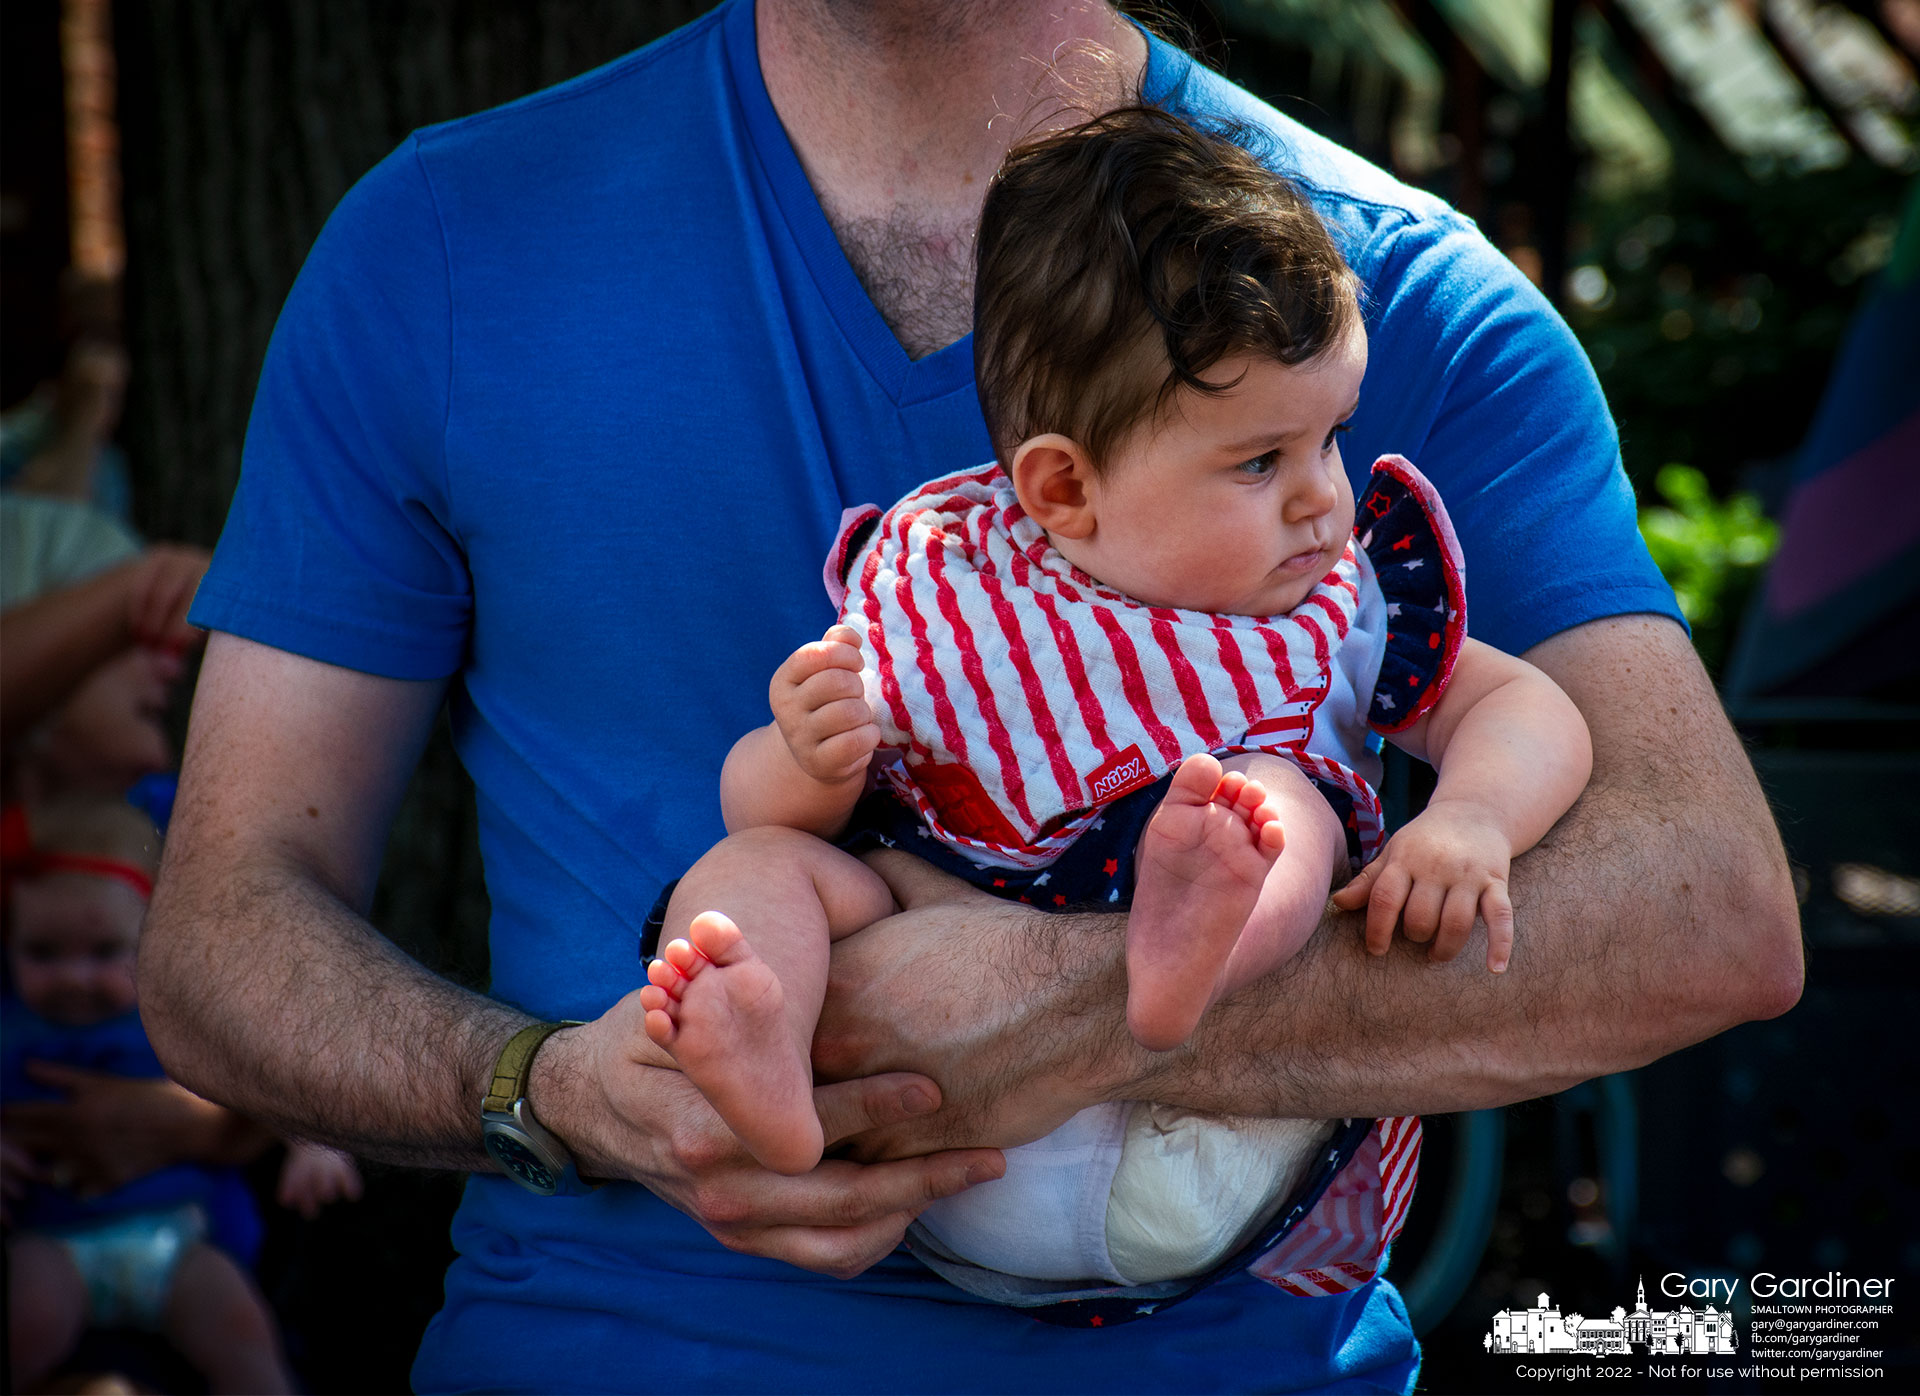 A father's arms cradle his child as they watch her first Fourth of July parade. My Final Photo for July 4, 2022.